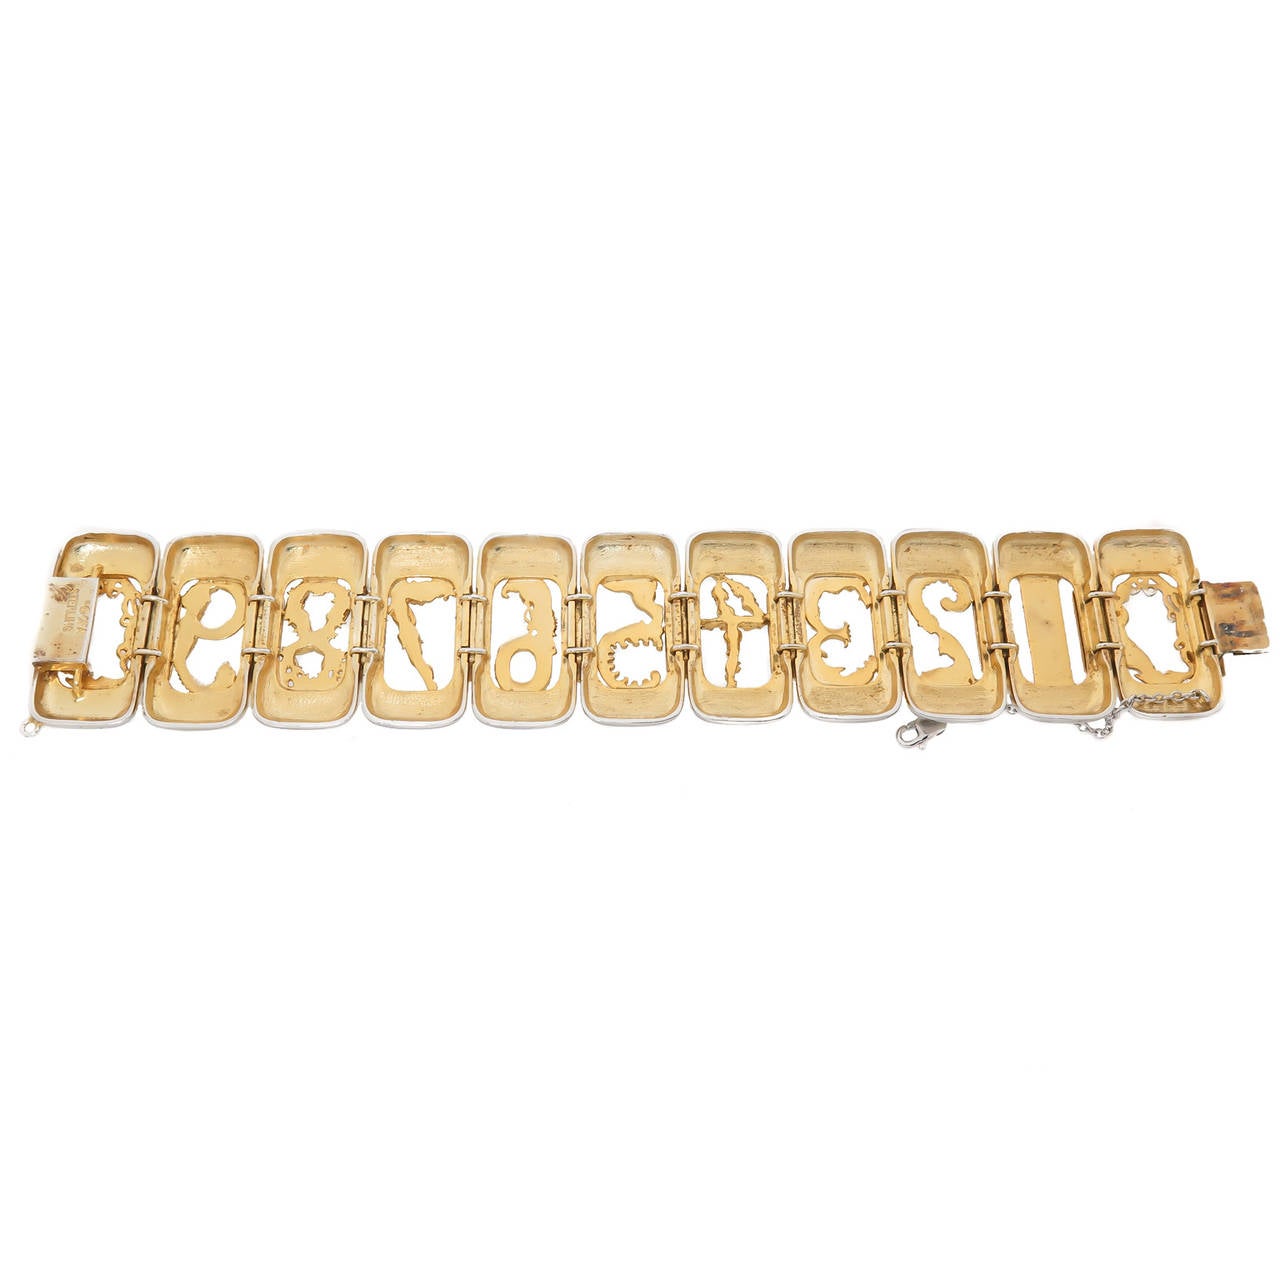 Circa 1980s Sterling Silver and Gold Wash Numbers Bracelet, measuring 7 1/2 inch in length and 1 3/8 inch wide. Signed Numbered and comes in the original Erte Circle Fine Art Gallery Presentation case.